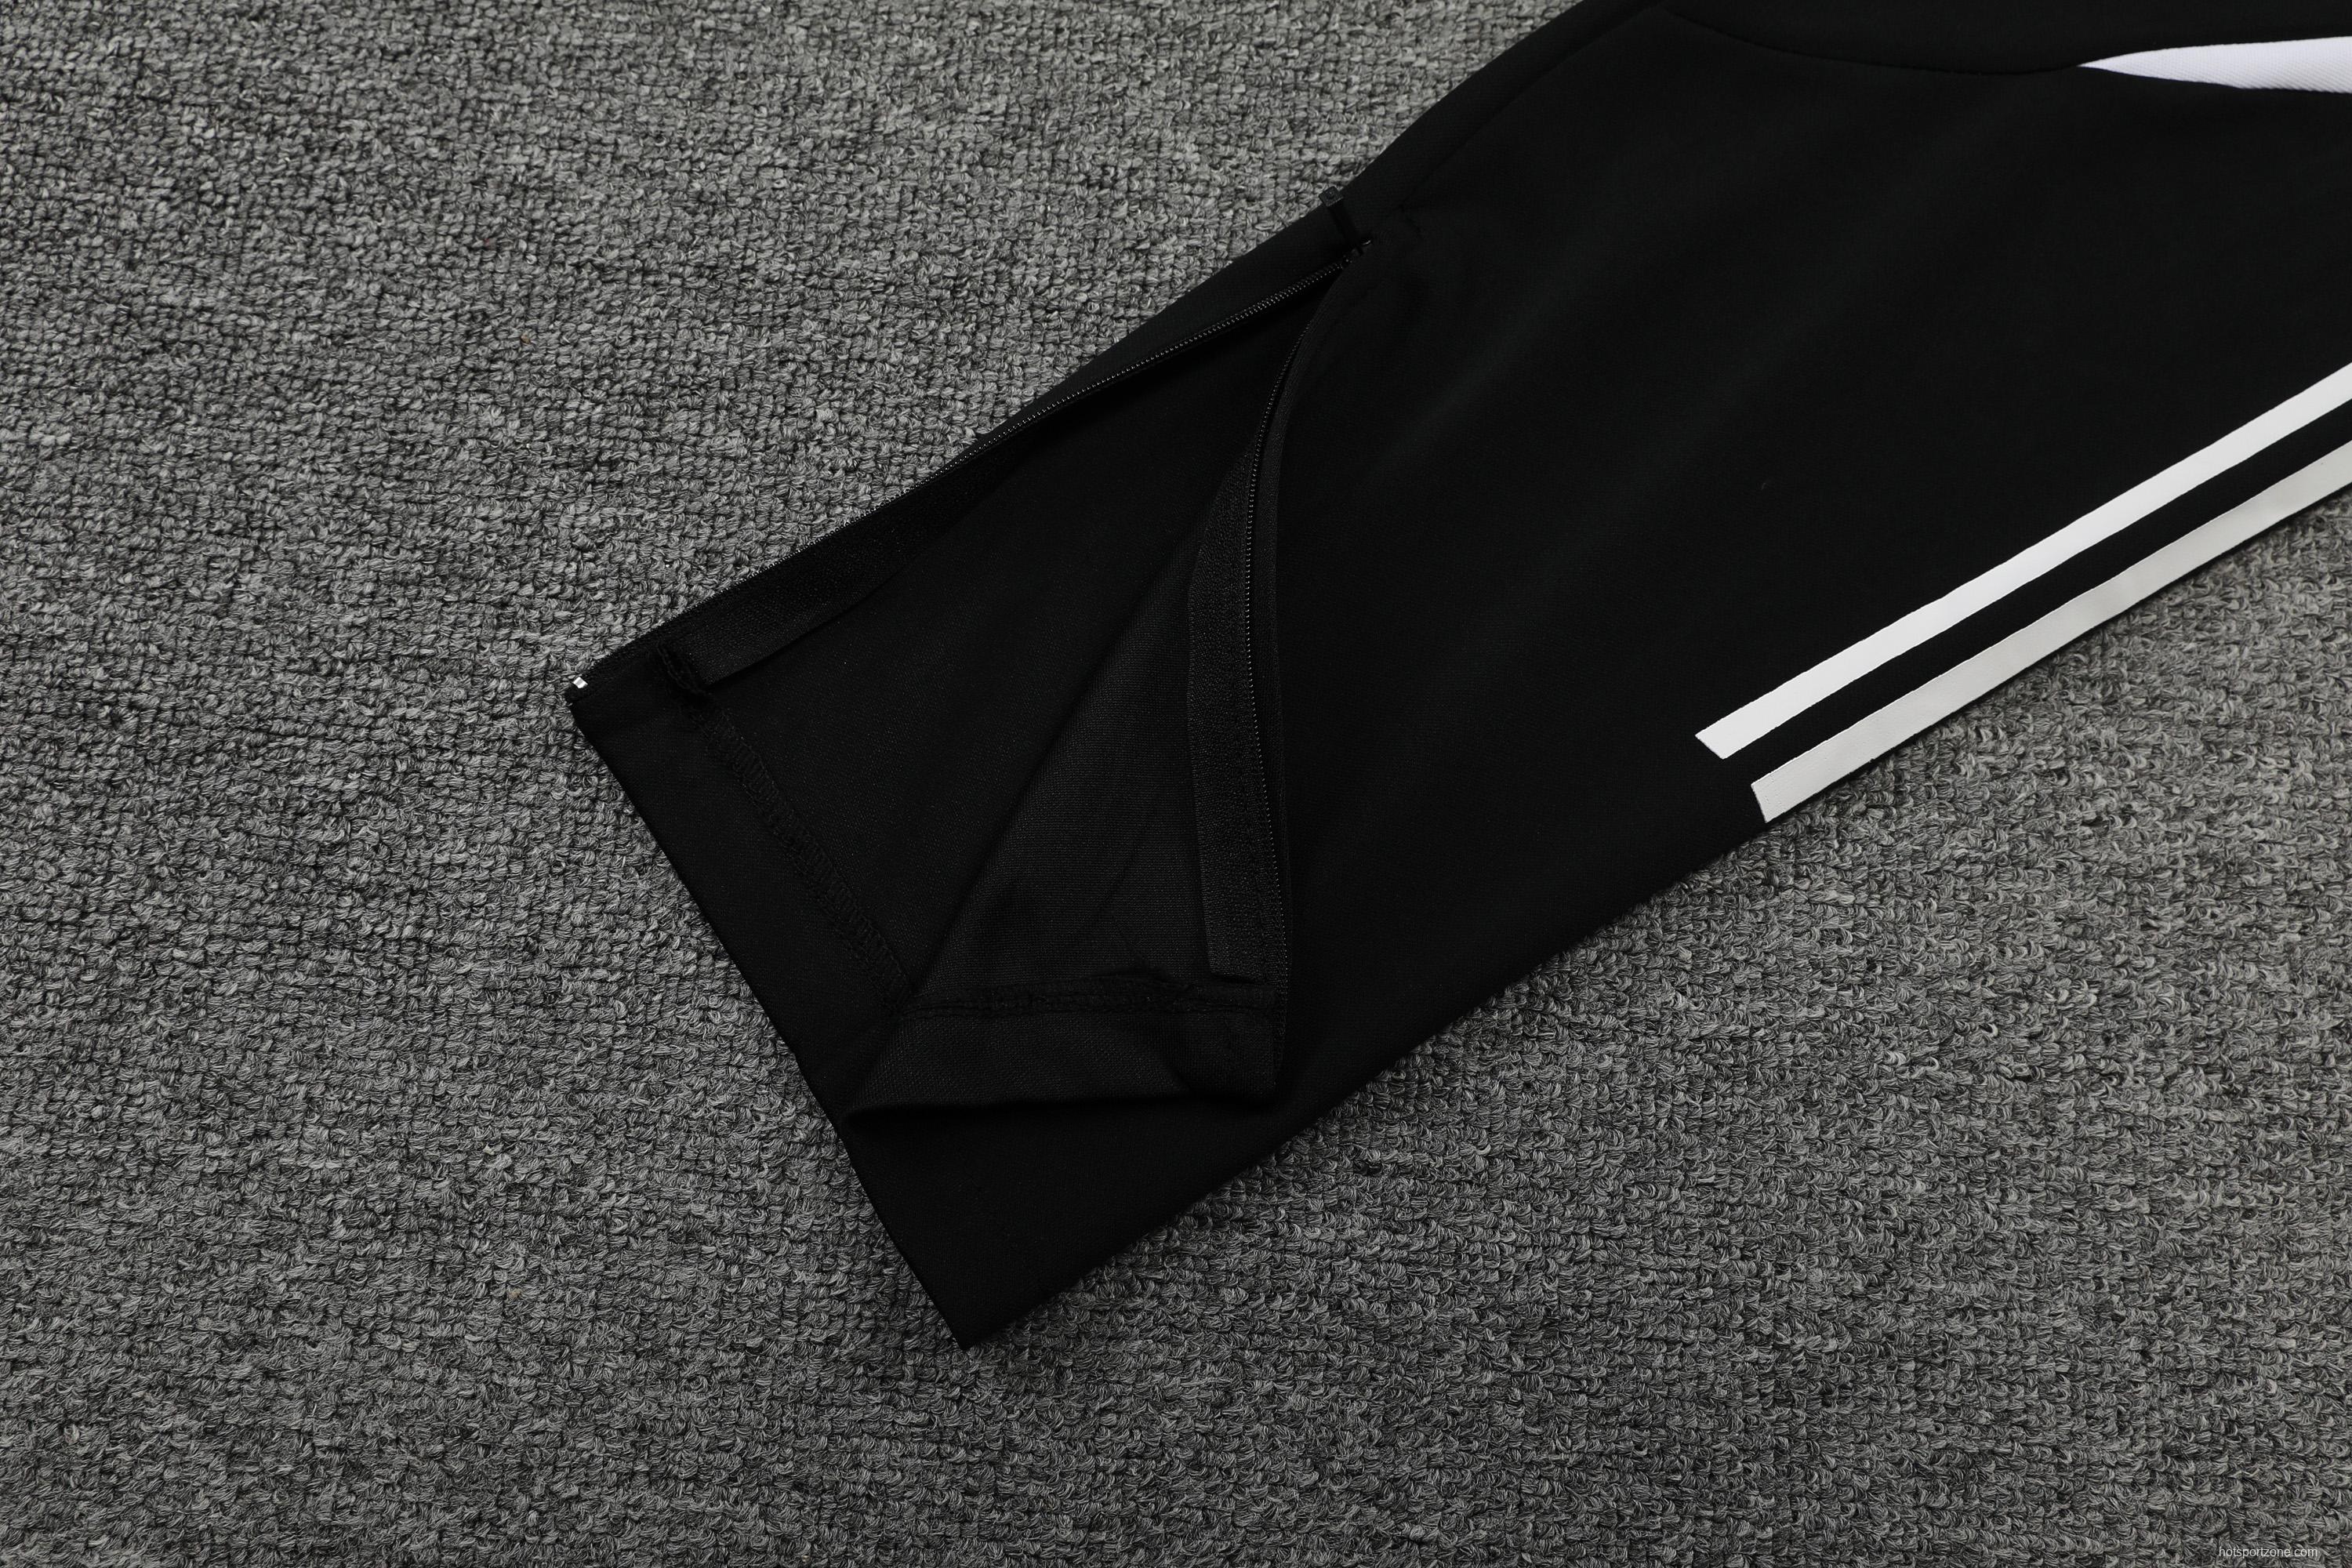 Ajax POLO kit black (not sold separately)